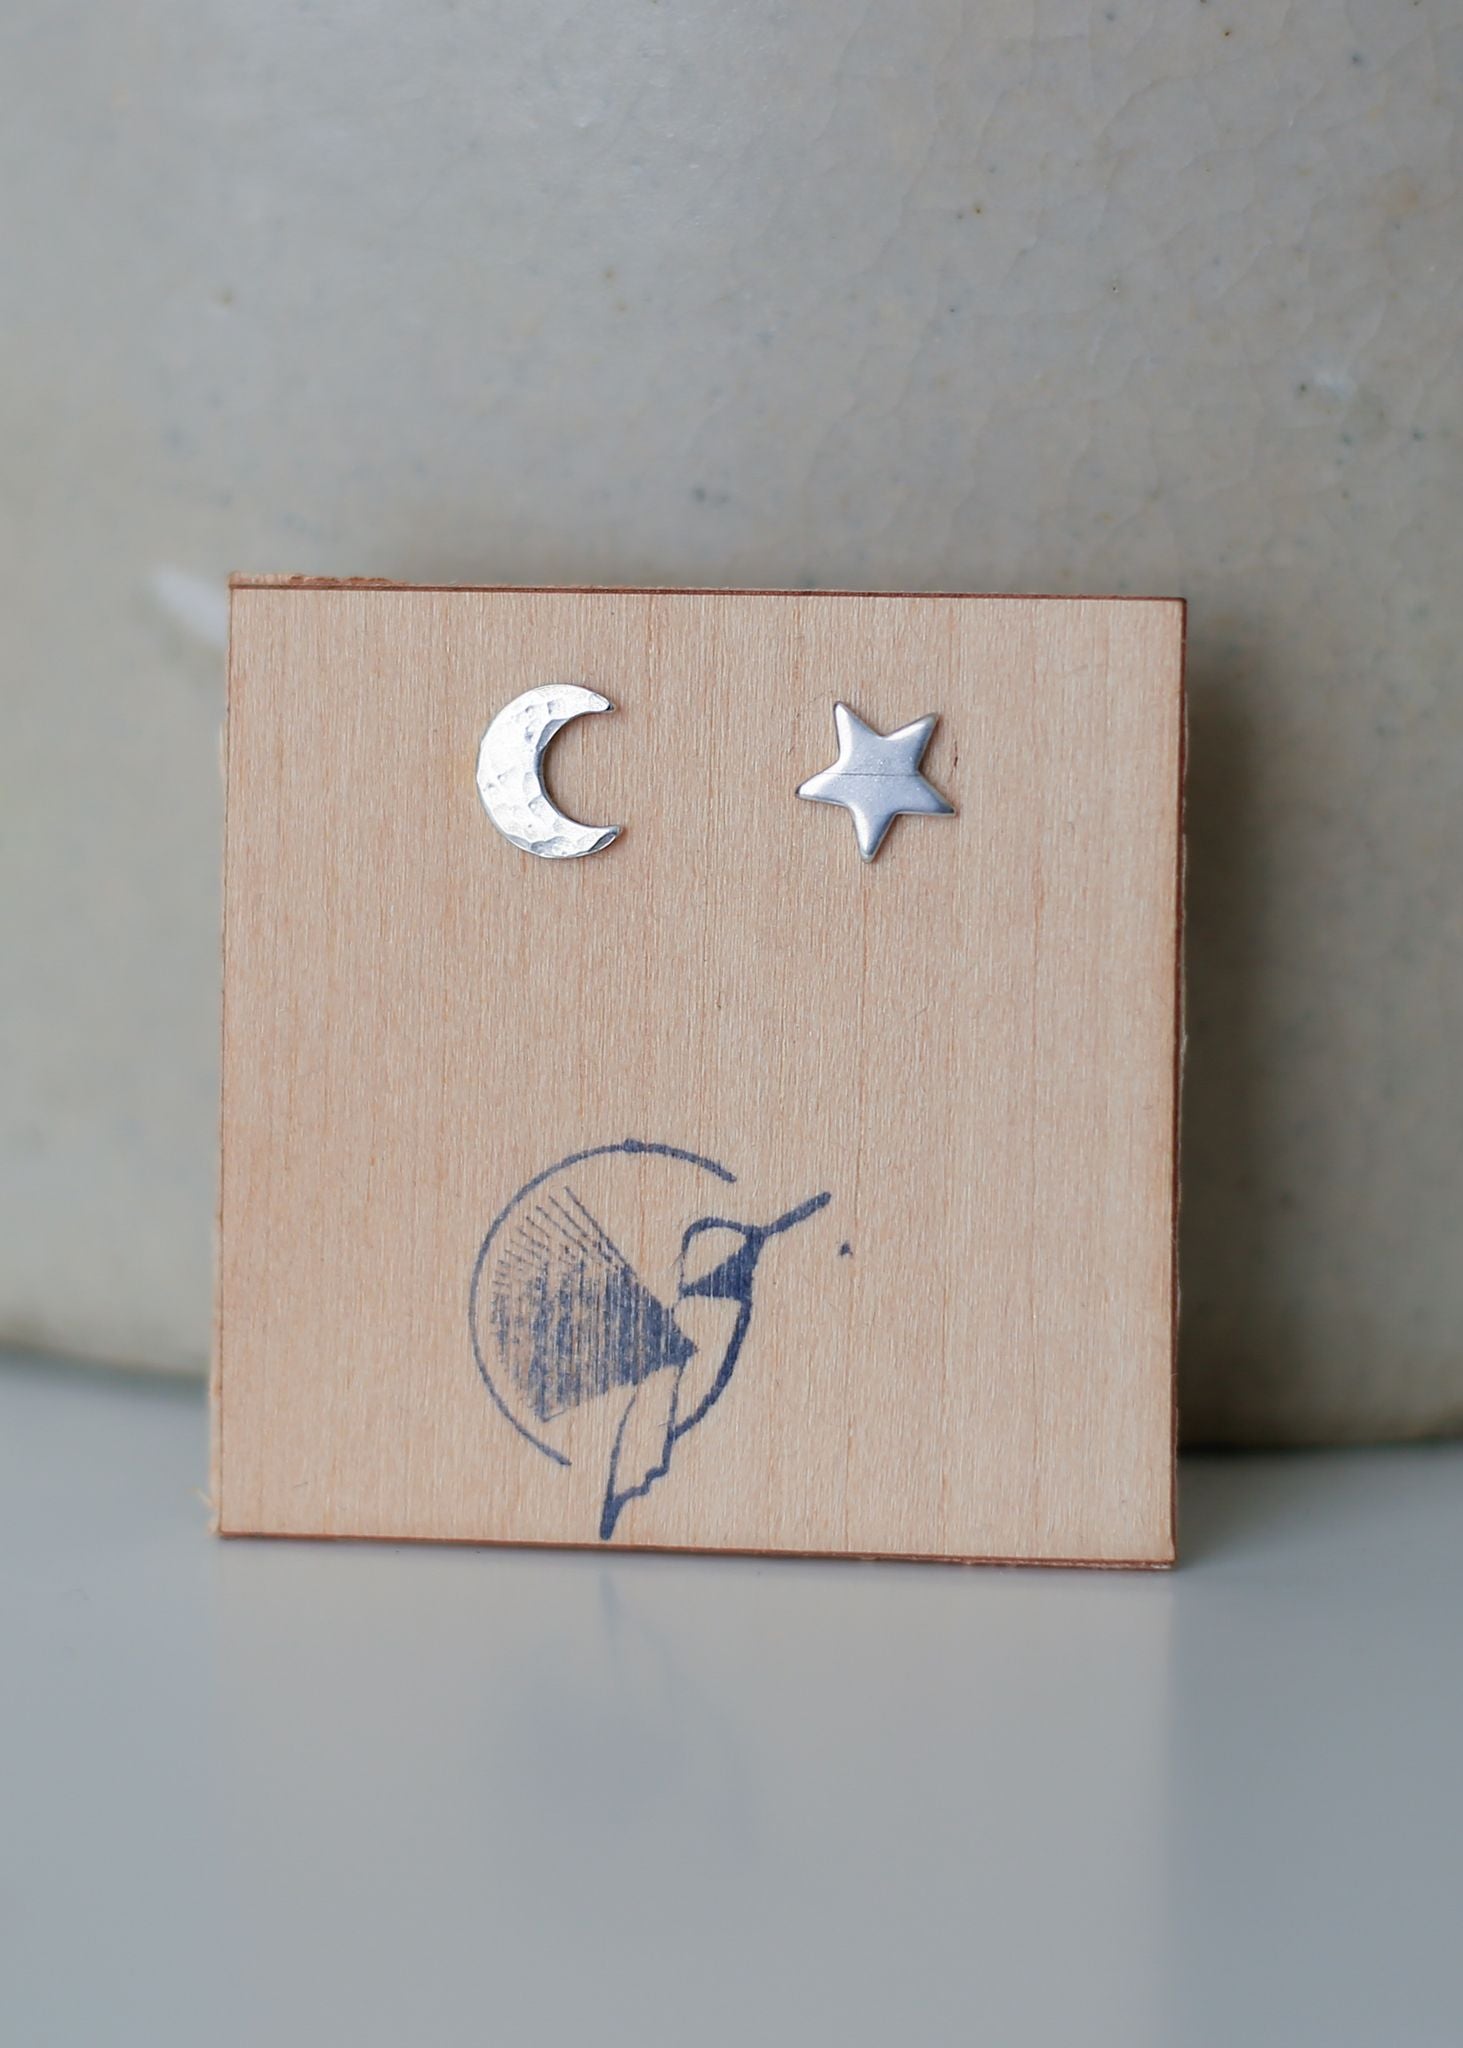 Sterling Silver Moon & Star Studs